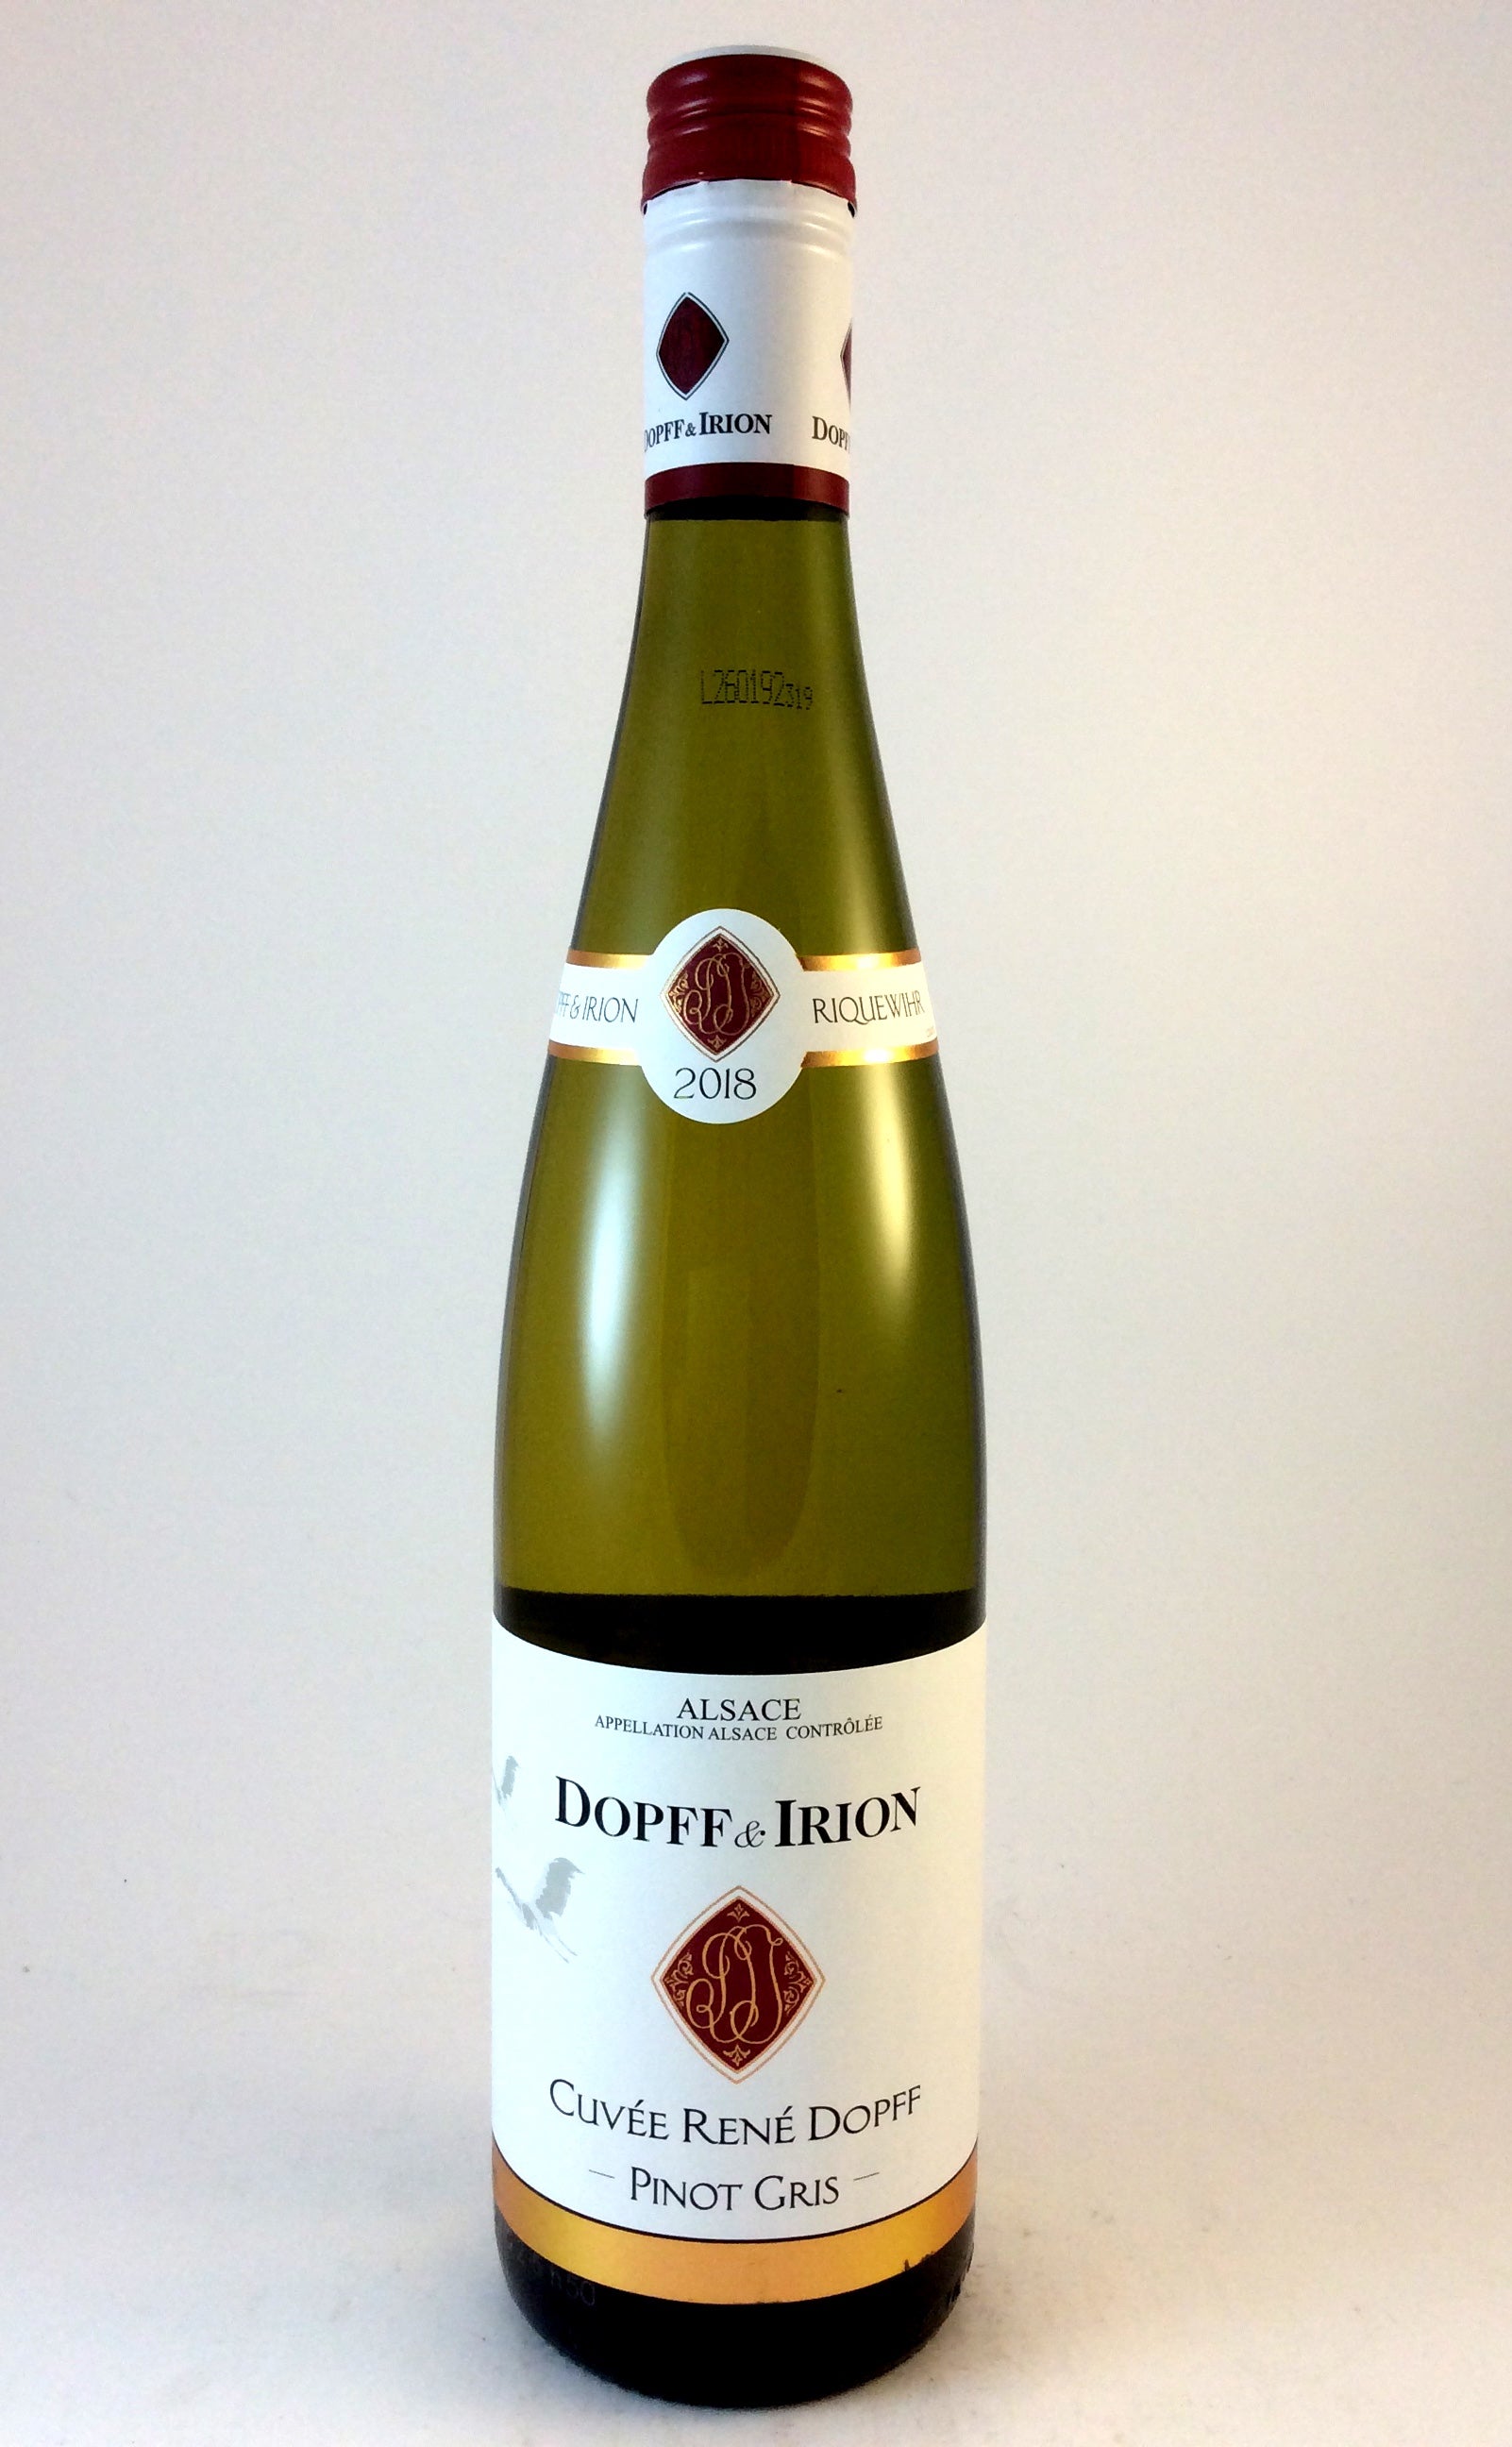 Dopff &amp; Irion Alsace Cuvee Rene Dopff Pinot Gris